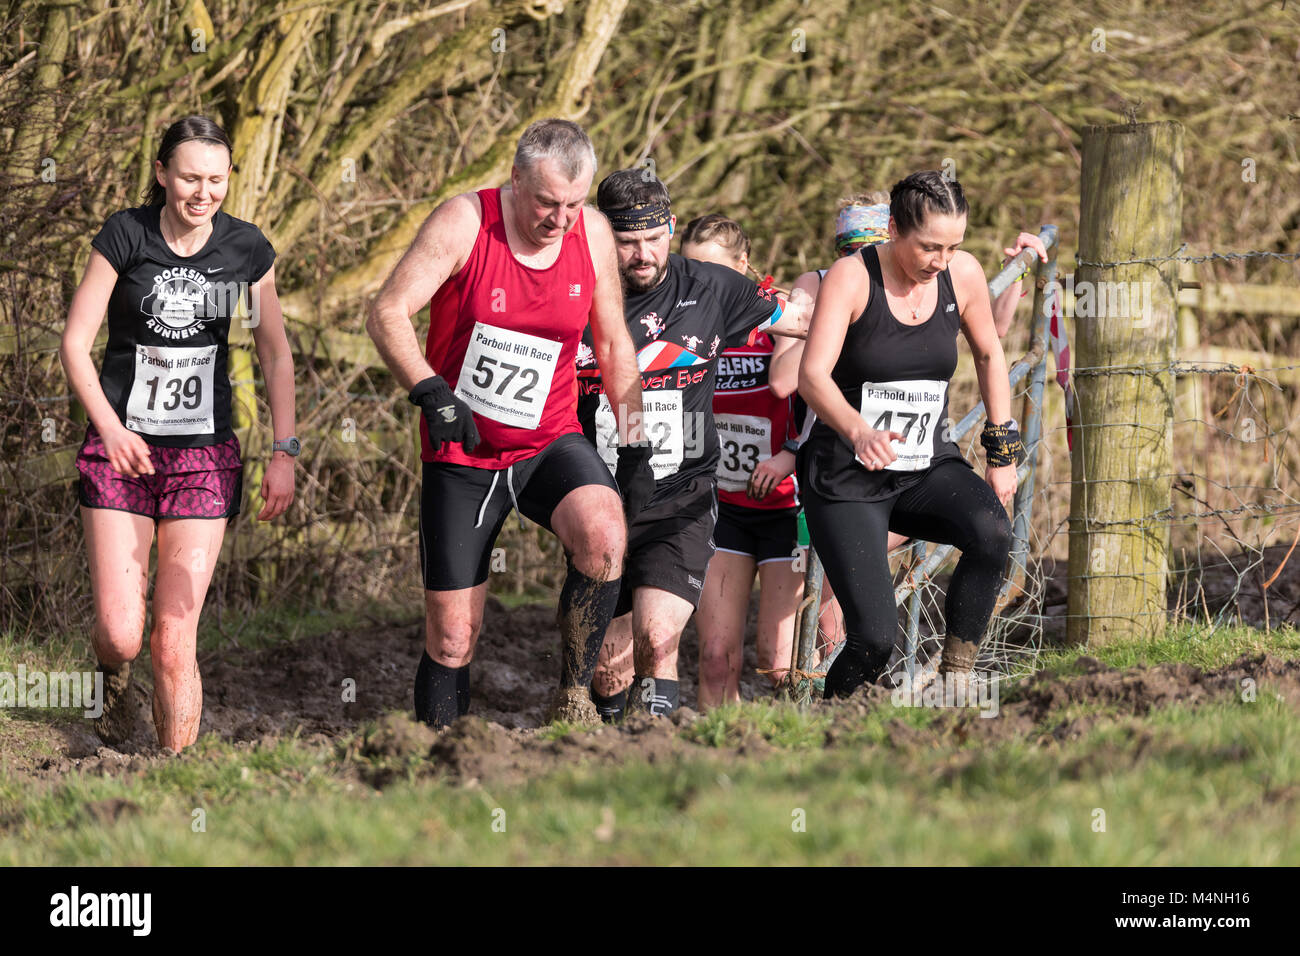 Lancashire, UK. 17th Feb, 2018. Skelmersdale Boundary Harriers organized the the 48th PARBOLD HILL RACE today, Saturday 17 Feb 2018 The race started at 2:00pm. over 6.75 miles multi terrain. The start/finish was at Richard Durning's Endowed Primary School,. Chorley Rd, Bispham, Nr. Parbold. Conditions were very muddy in West Lancashire this afternoon, although the race took place in nice sunshine. Credit: Dave McAleavy Images/Alamy Live News Stock Photo